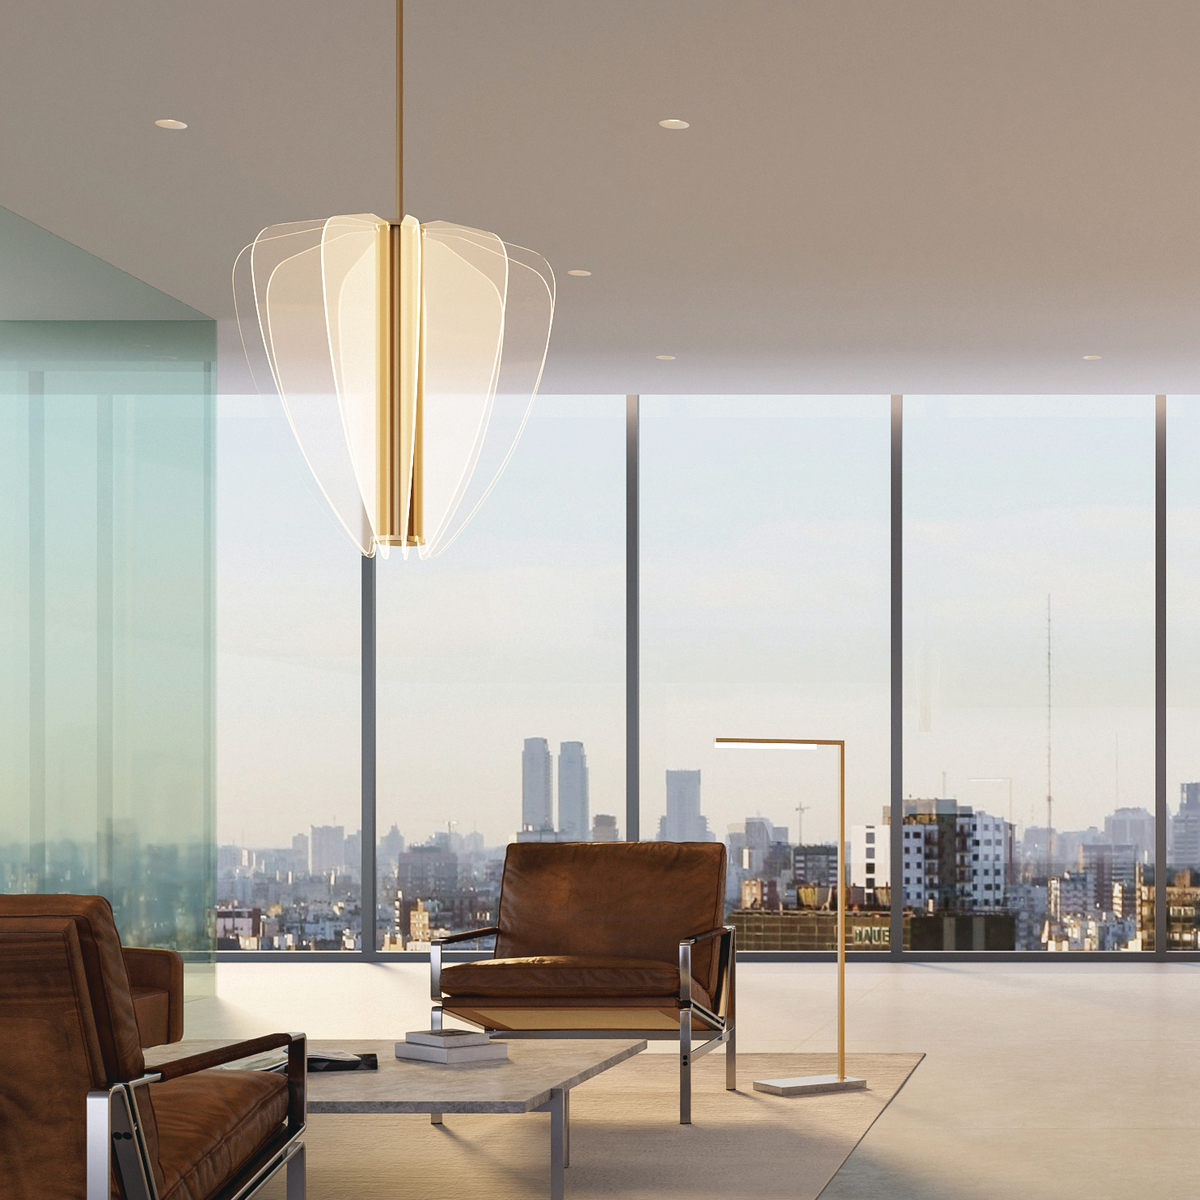 Translucent luminaire in upper level office with skyline view